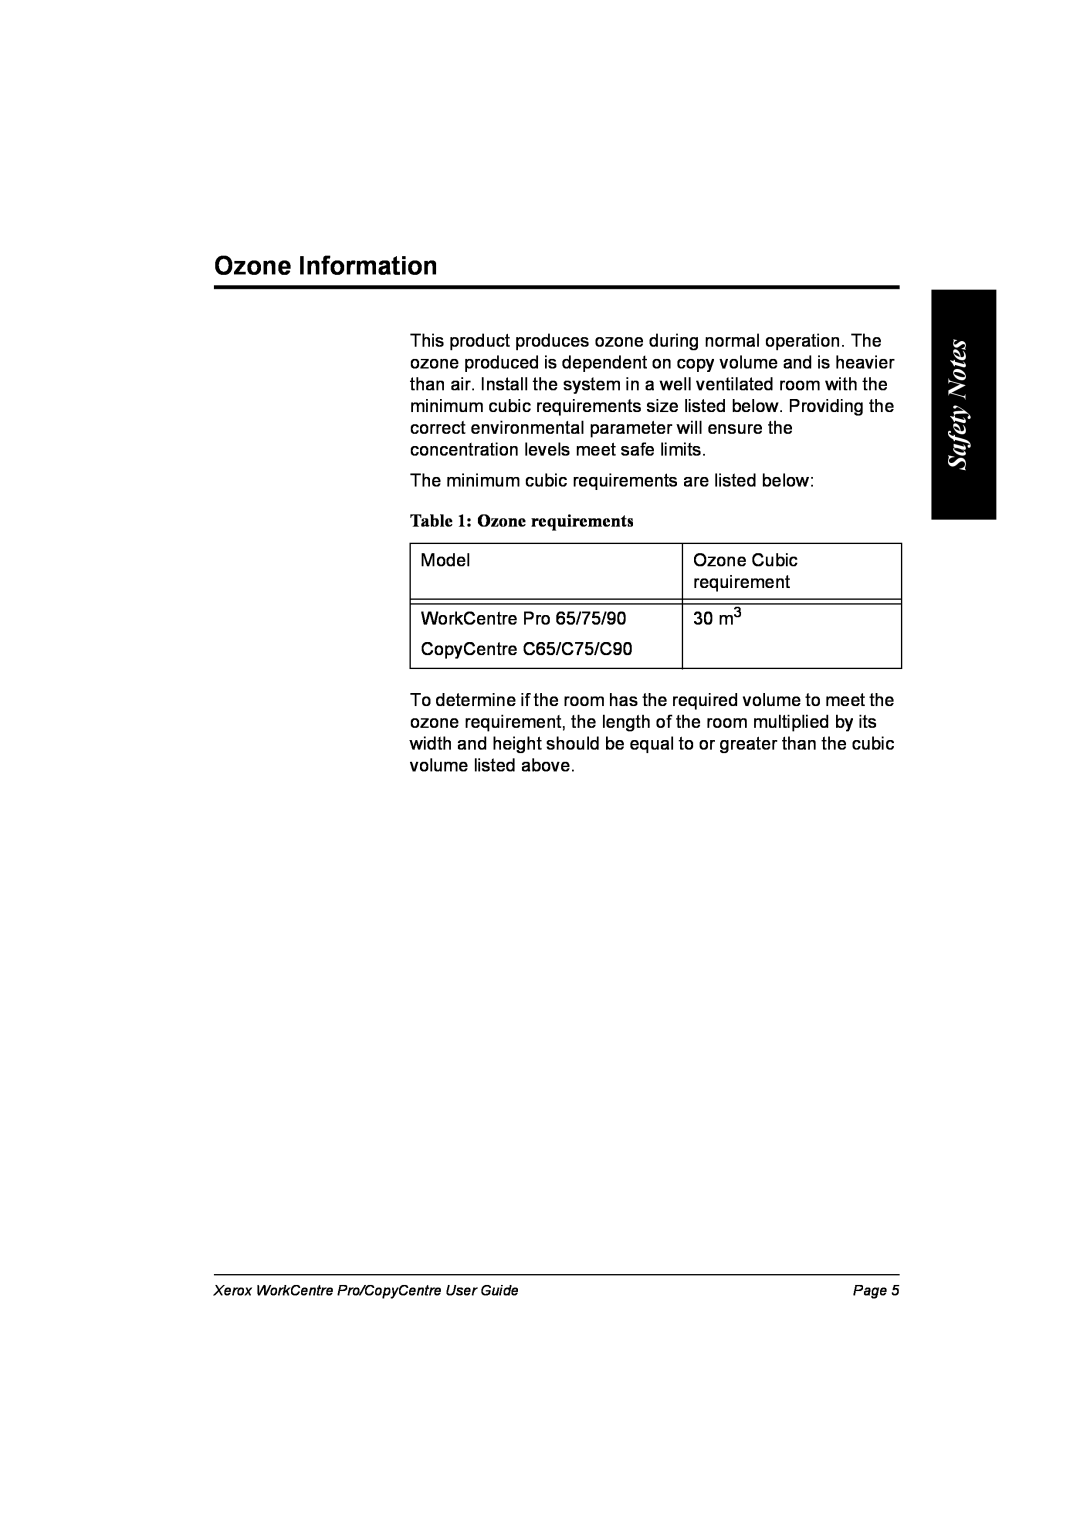 Xerox C90, C75, C65, WorkCentre Pro 75 manual Ozone Information, Safety Notes, Ozone requirements 